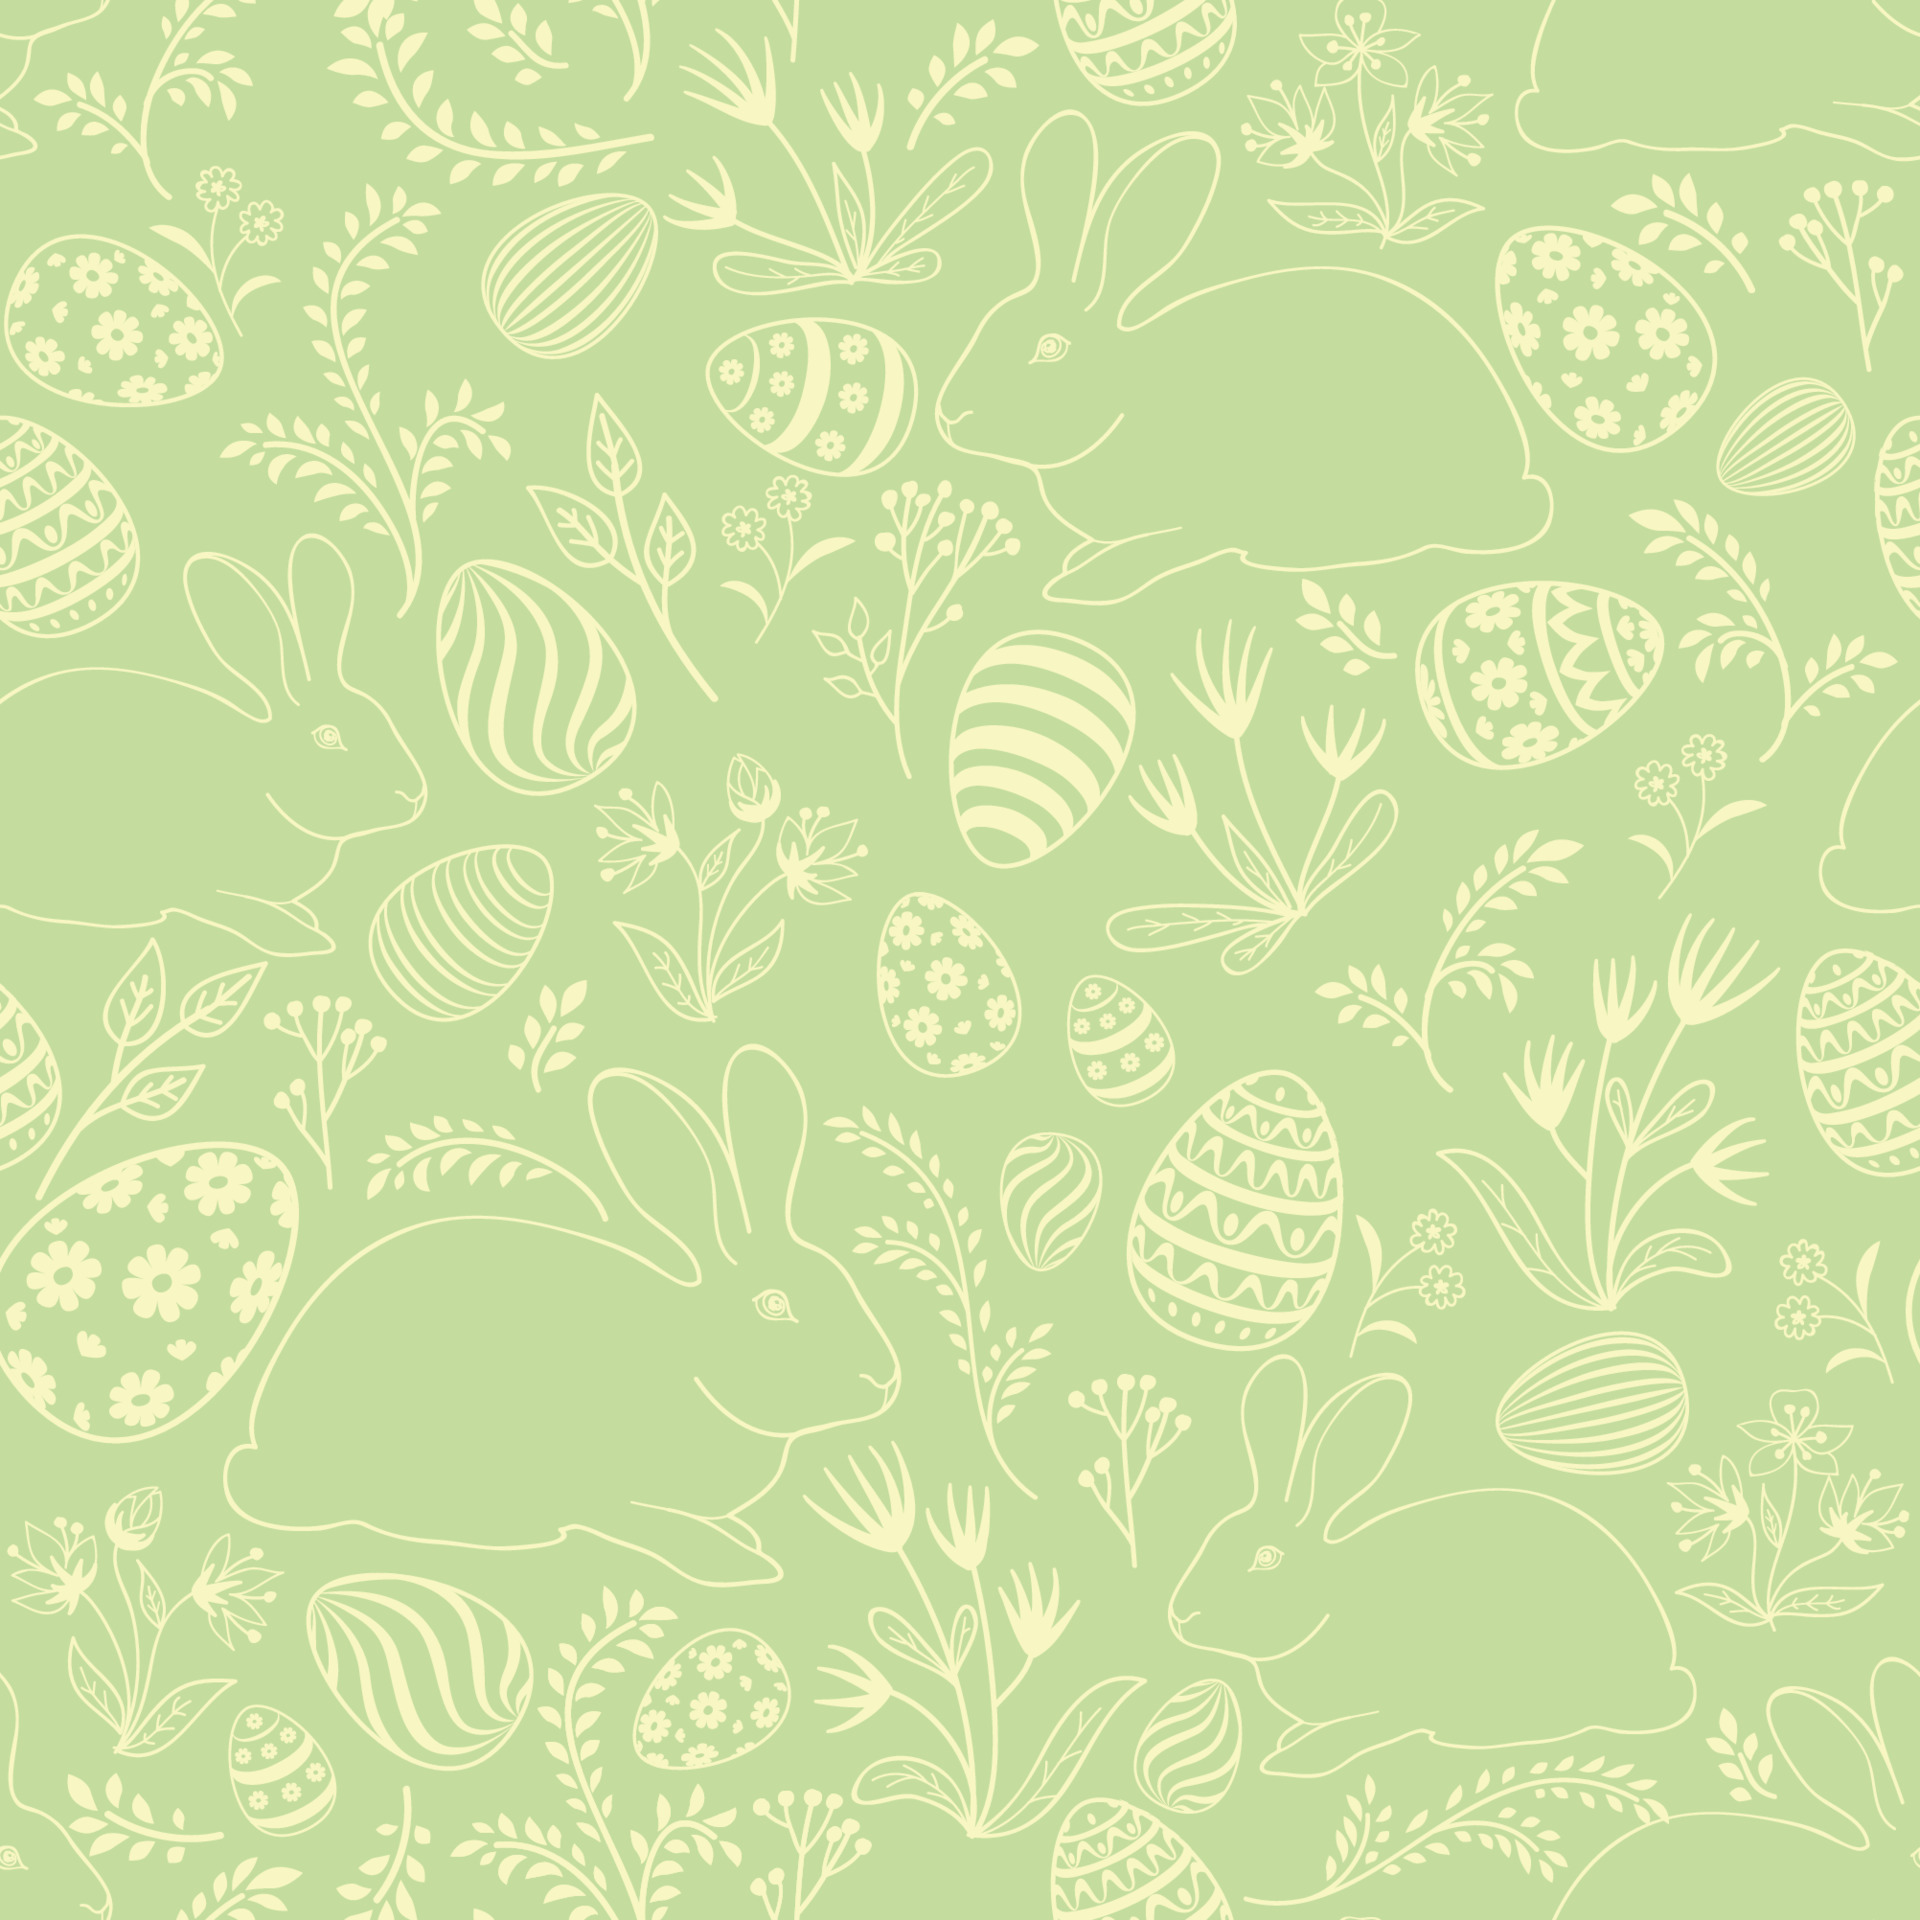 Easter egg floral seamless pattern. Spring holiday background for printing on fabric, paper for scrapbooking, gift wrap and wallpaper